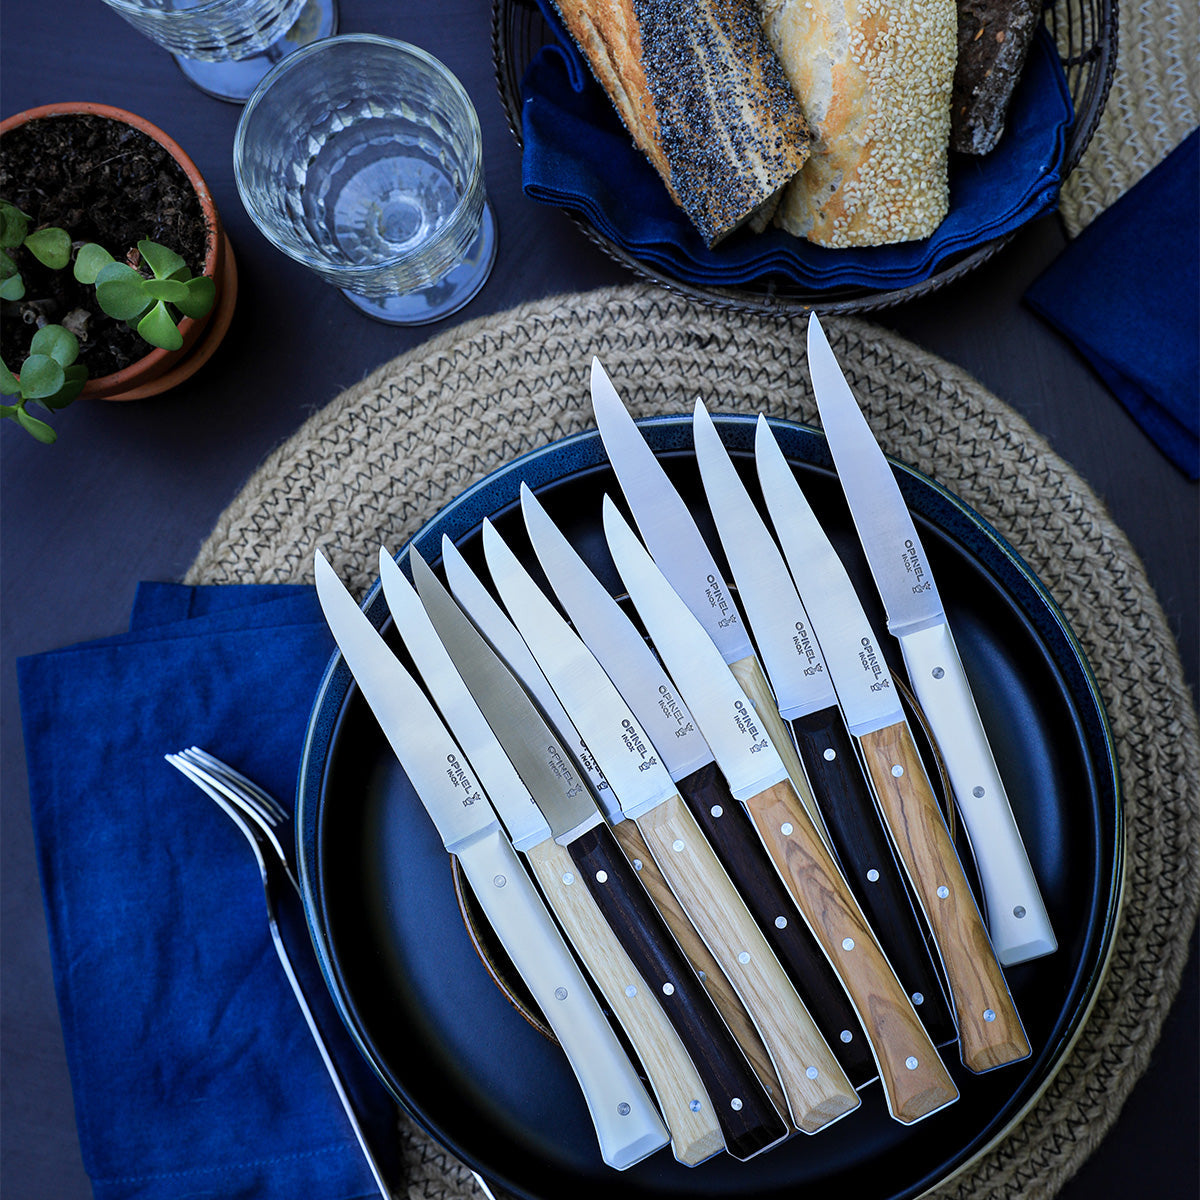 An Ode to the Best Steak Knives